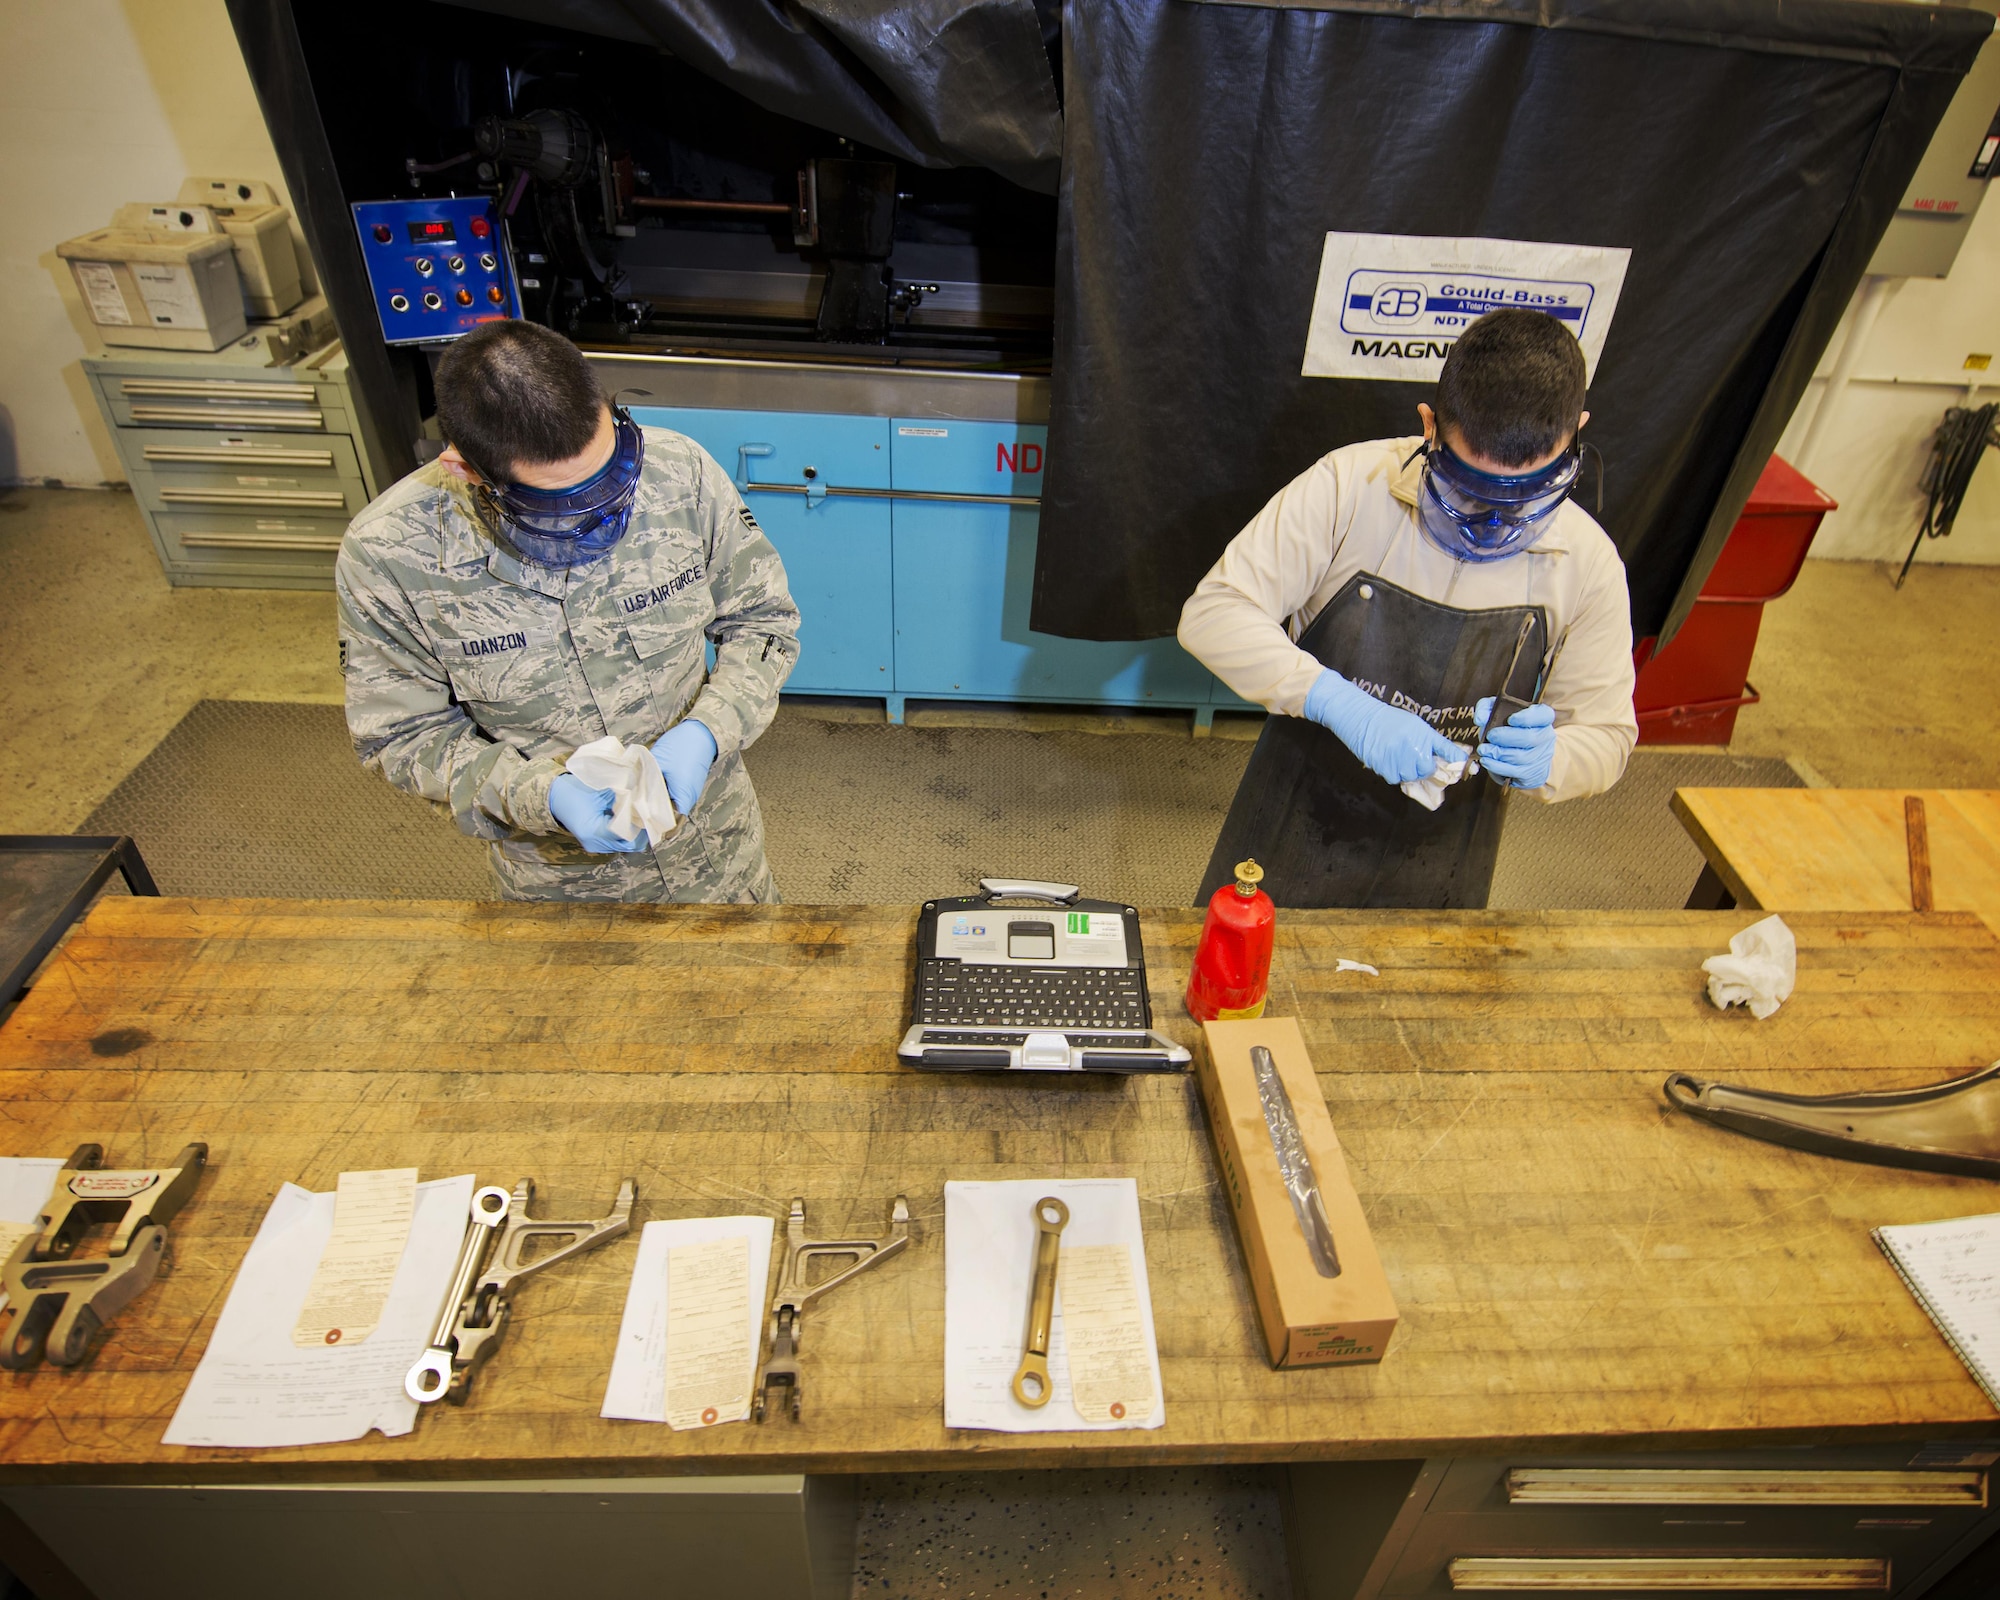 Airmen from the 5th Aircraft Maintenance Squadron clean grease from aircraft parts before a magnetic particle inspection at Minot Air Force Base, N.D., Oct. 18, 2016. All debris and grease are removed to prevent contamination of the particle bath during the inspection process. (U.S. Air Force photo/Airman 1st Class J.T. Armstrong)